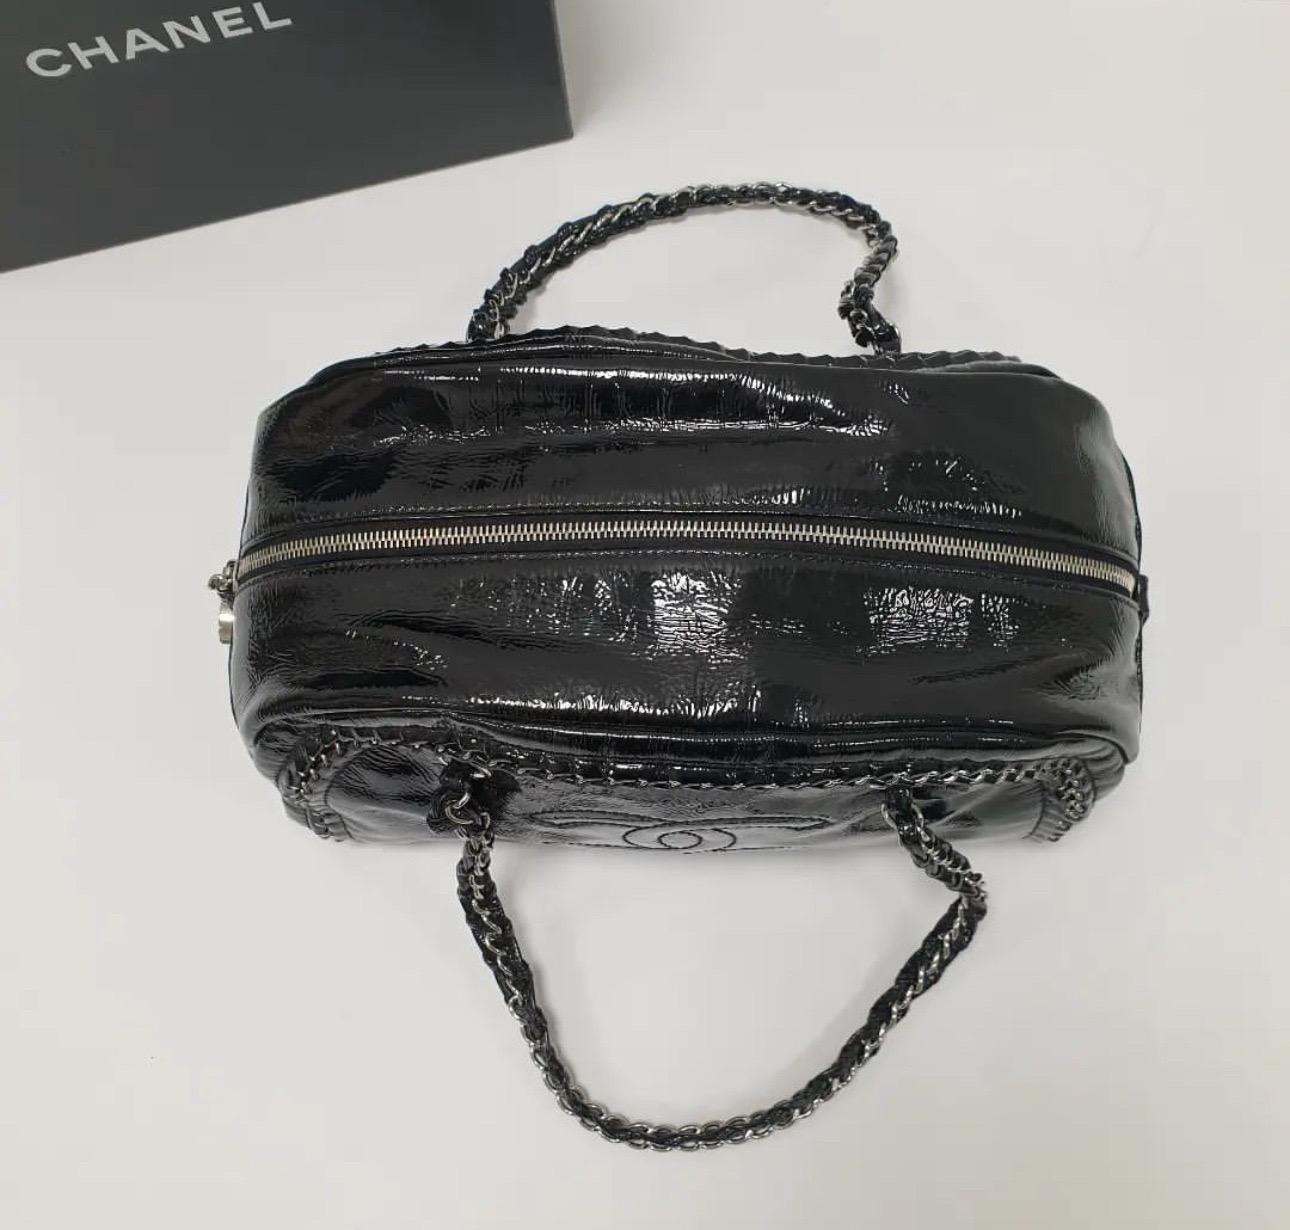 This glamorous Chanel Black Patent Leather Luxe Ligne Medium Bowler Bag is truly desirable. It features a sleek bowler design with silvertone braided leather/chain straps and embedded chain around the trim. 
33*16*14 cm
Very good condition.
No box.